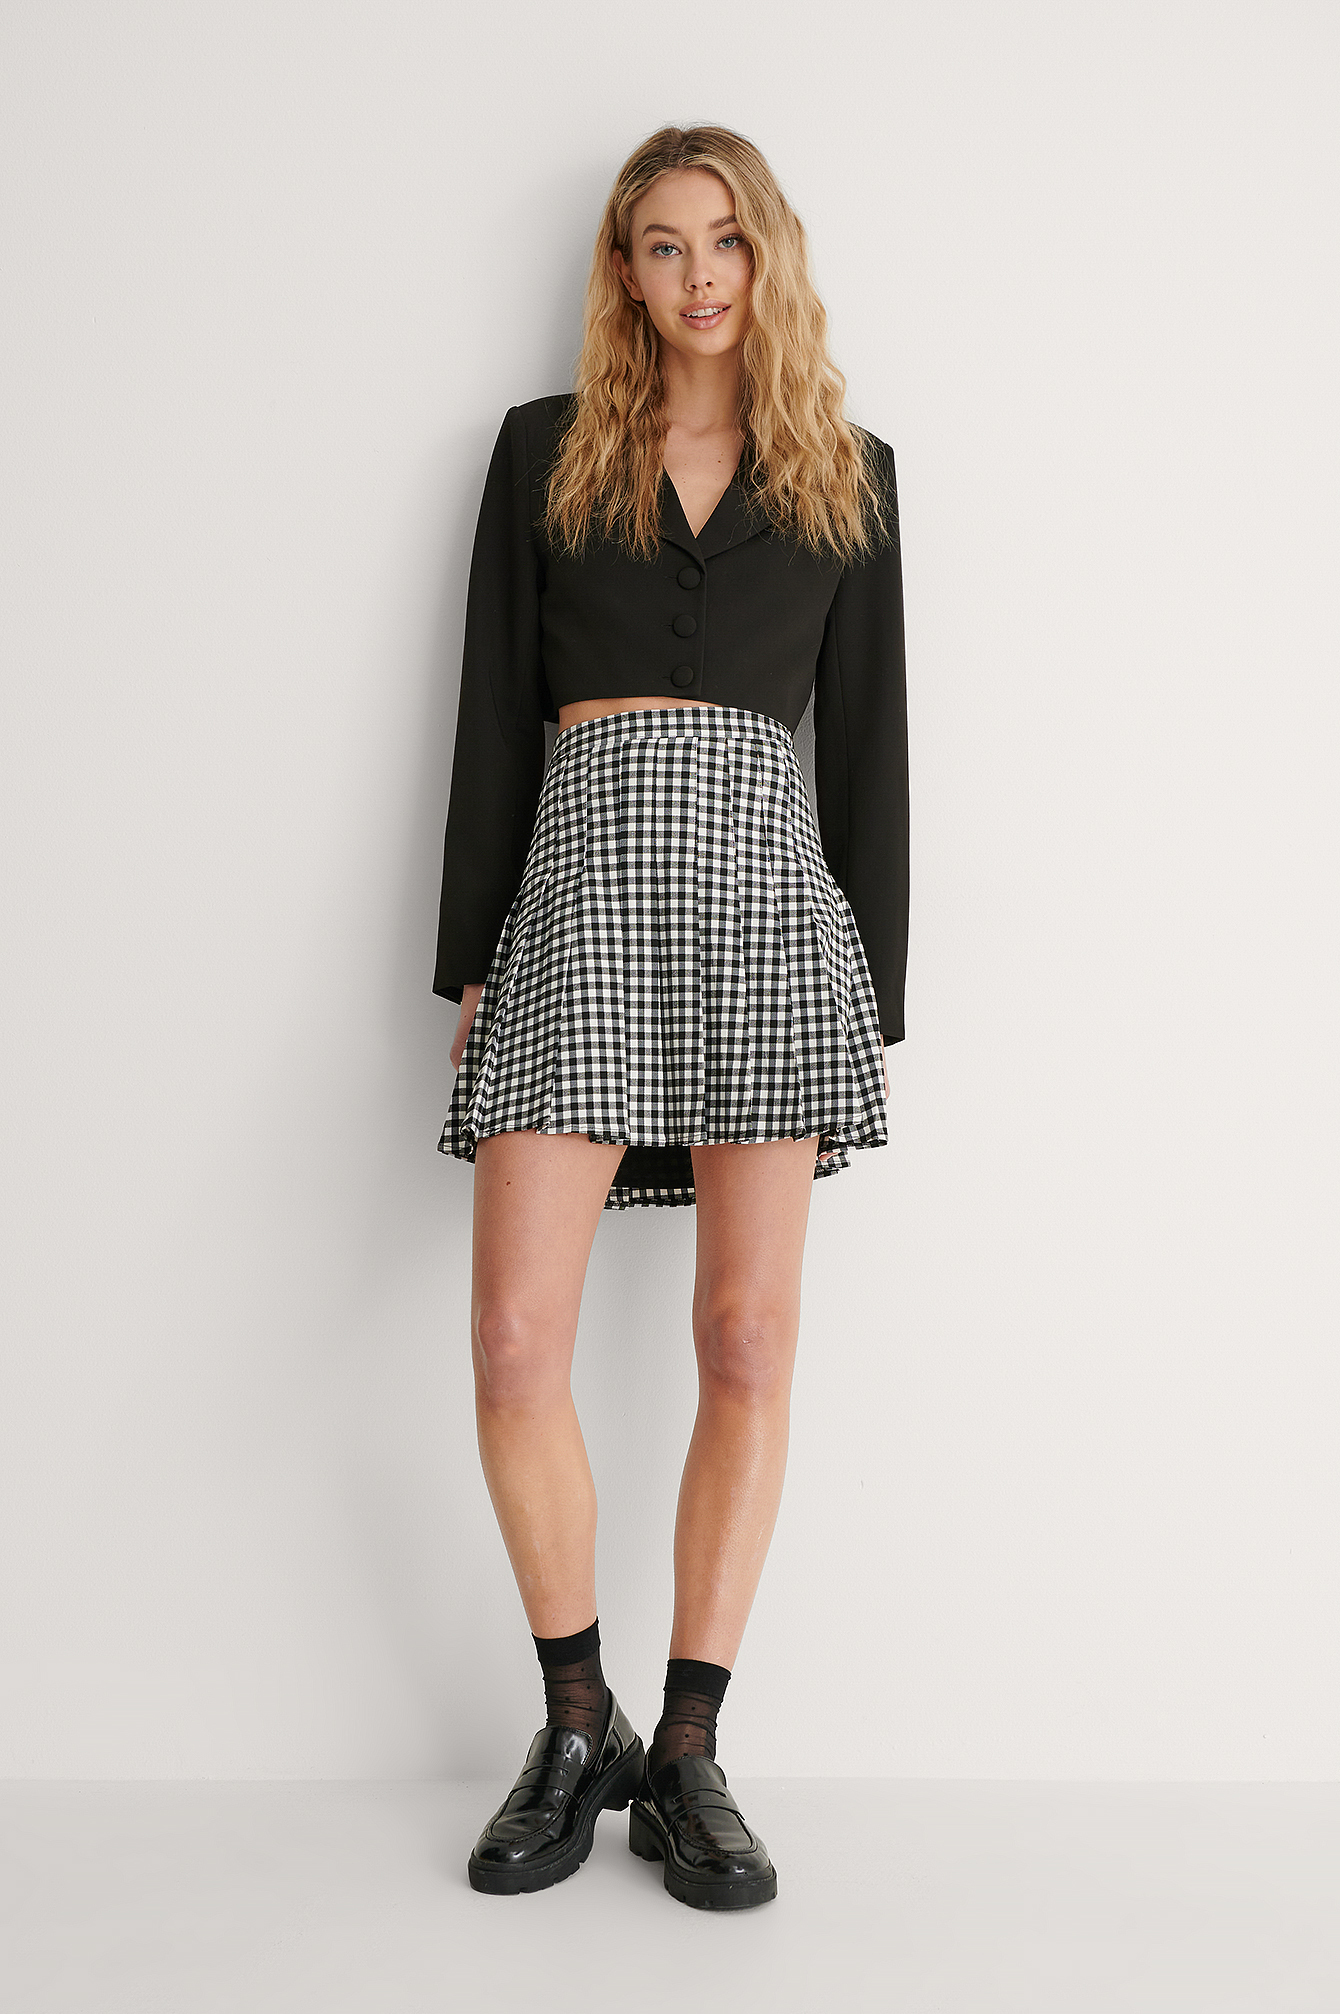 Pleated Check Mini Skirt outfit!